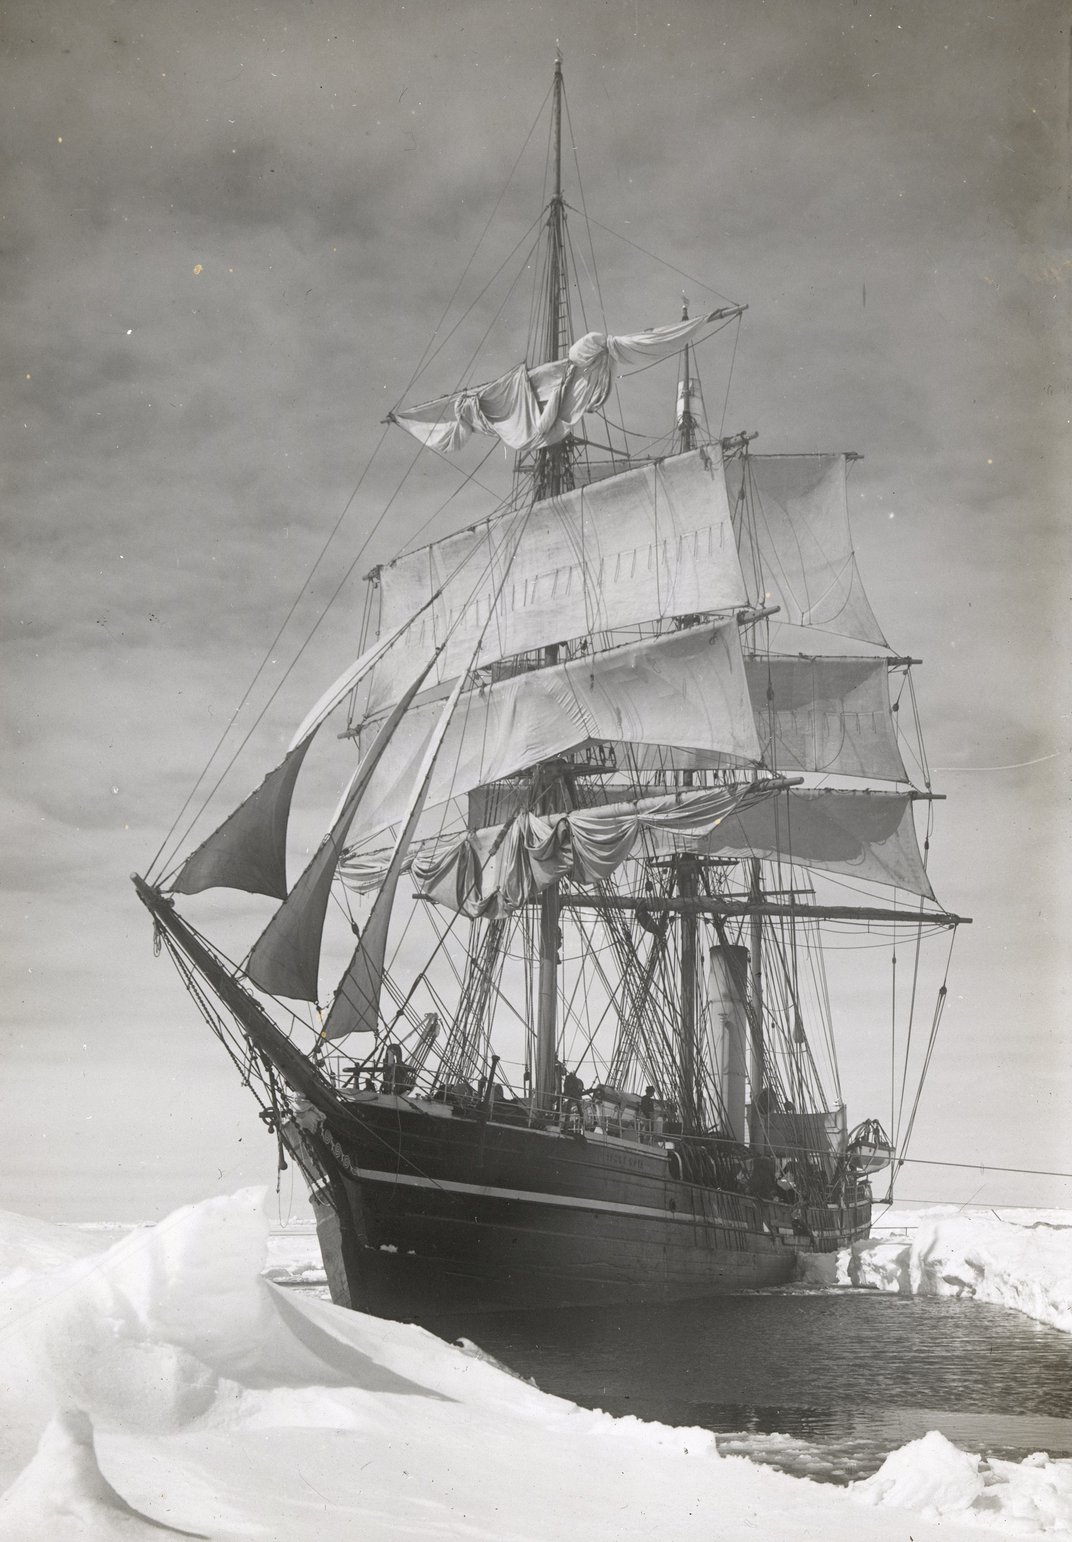 Early 20th-century ship stuck in ice